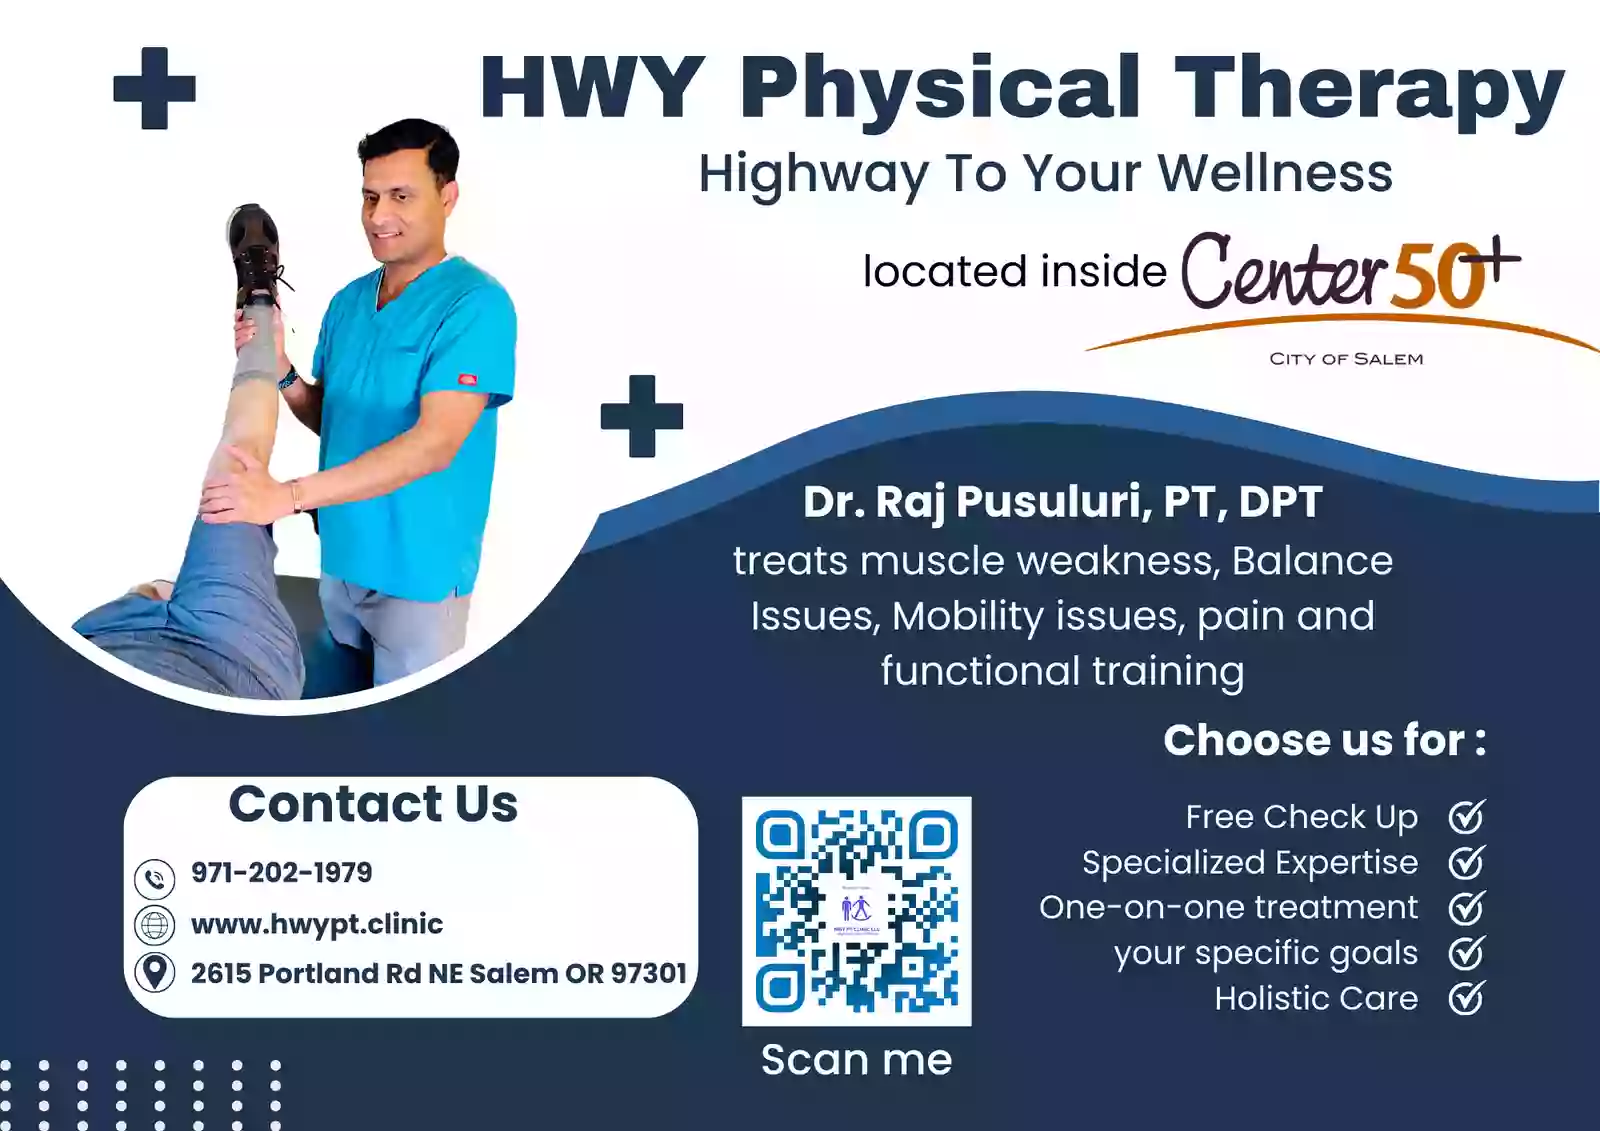 HWY Physical Therapy @ Center 50+ Salem